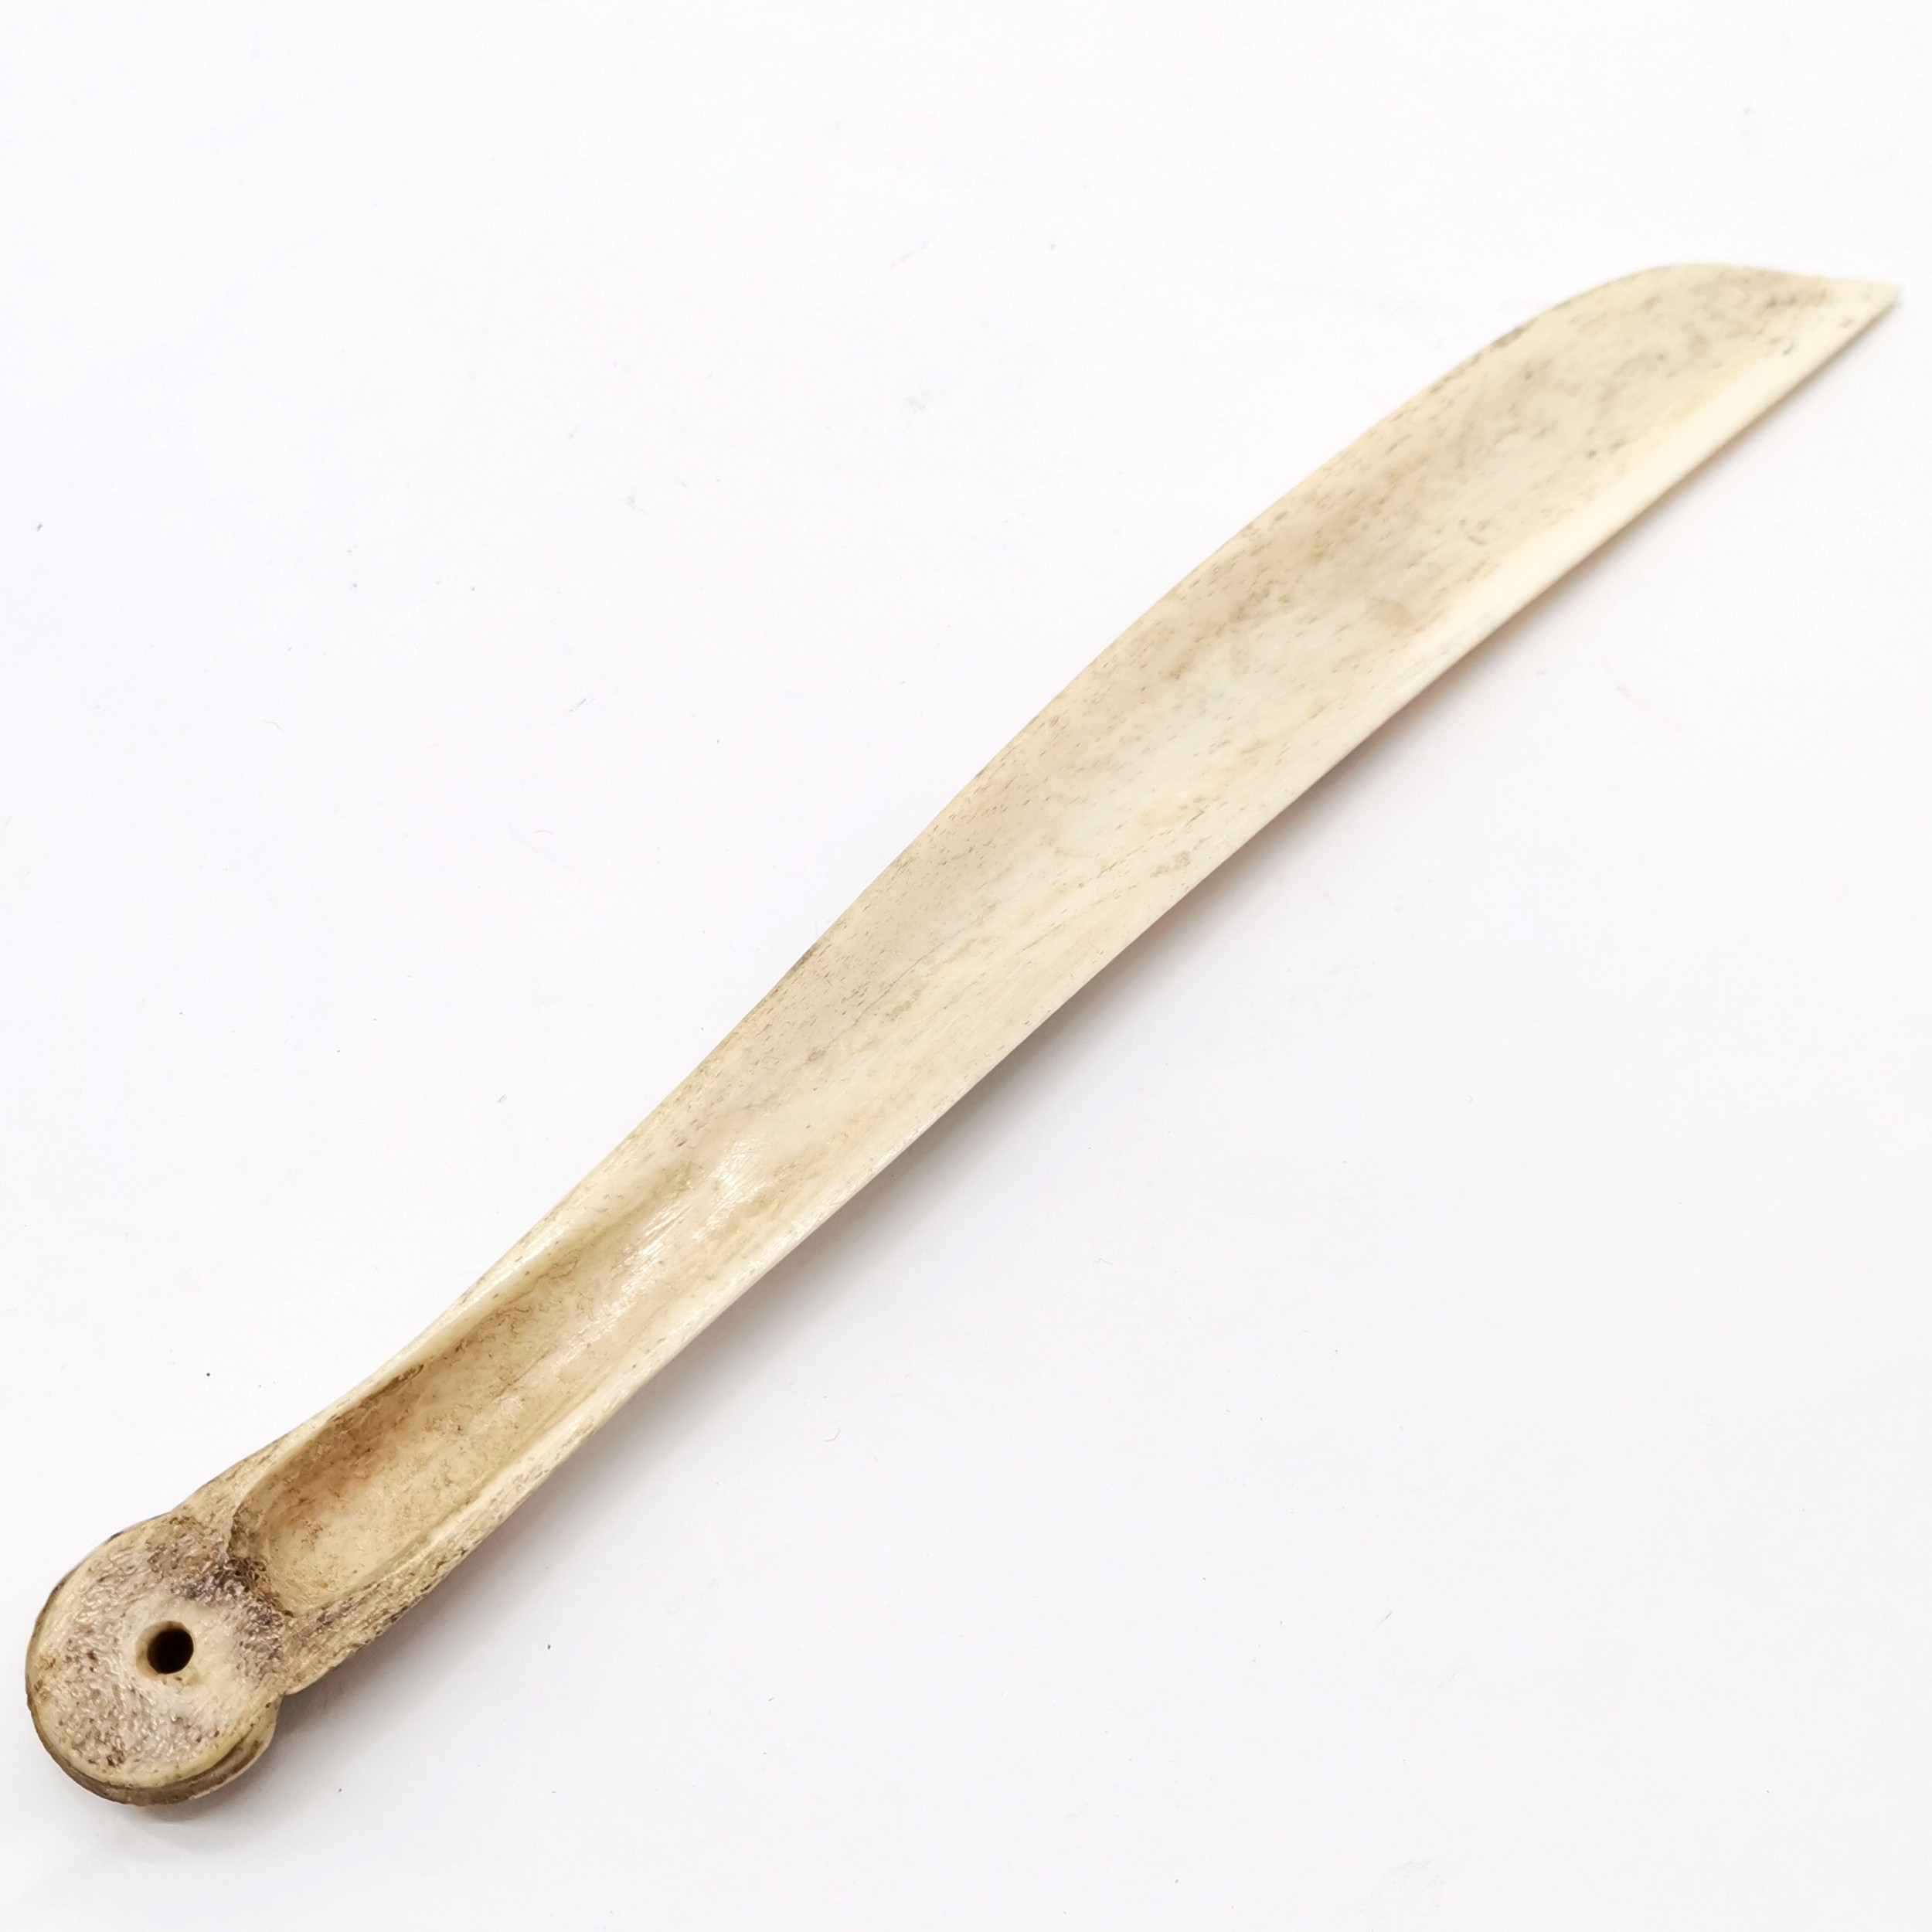 Inuit scrimshaw carved bone scraping knife with carabou & tent detail - 24cm long - Image 3 of 3